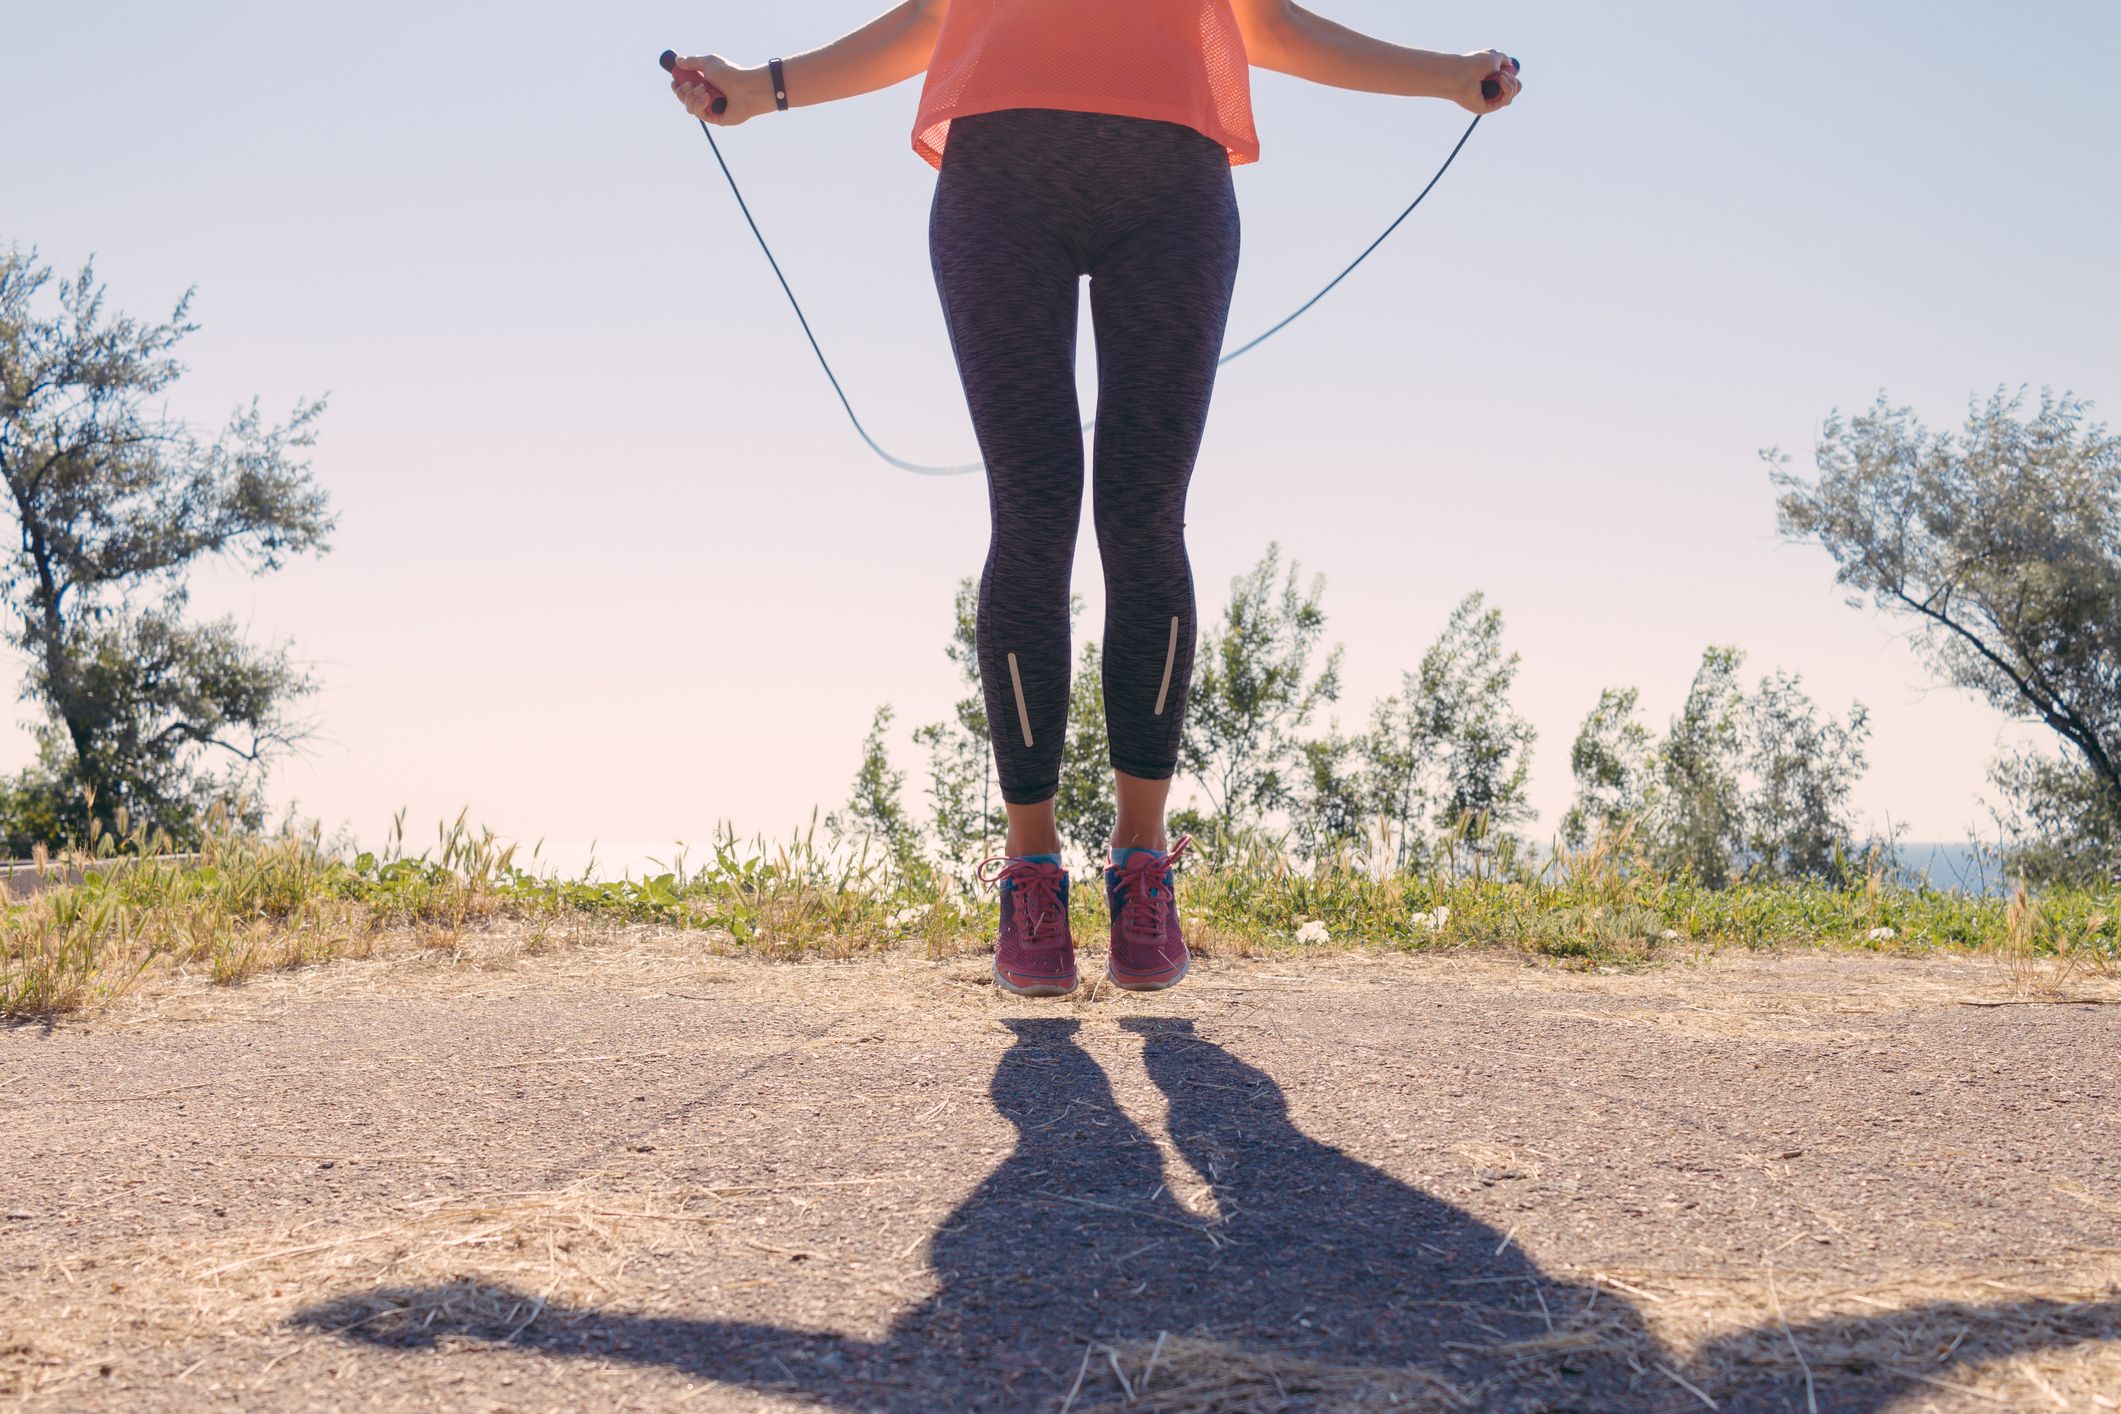 Jump Rope Workouts: The Best Jump Rope Workout - Men's Journal